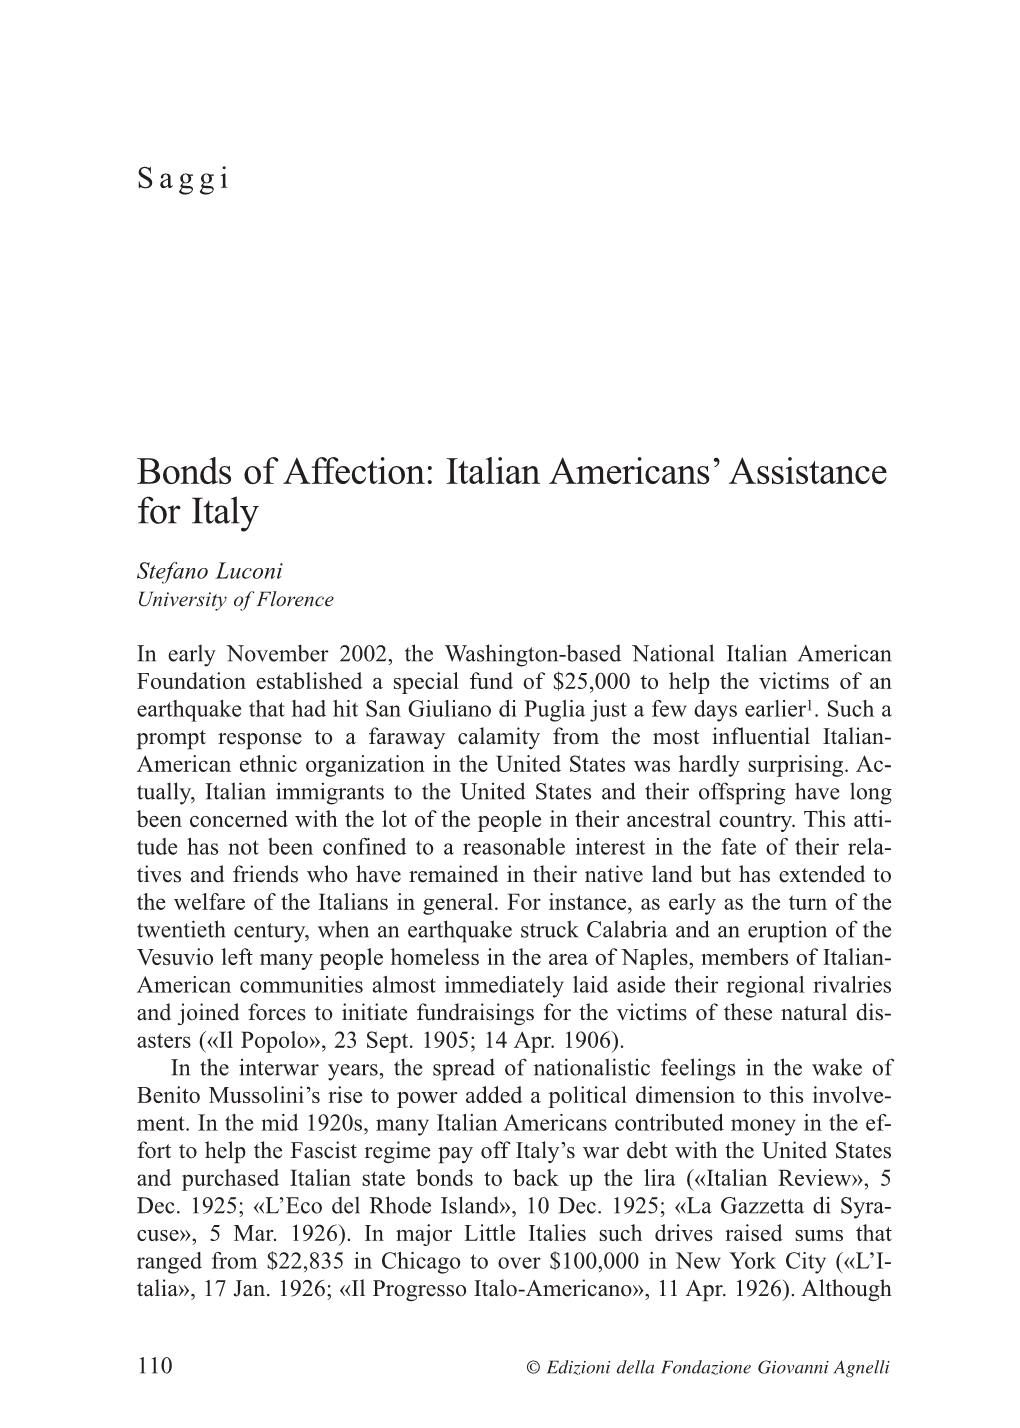 Italian Americans' Assistance for Italy